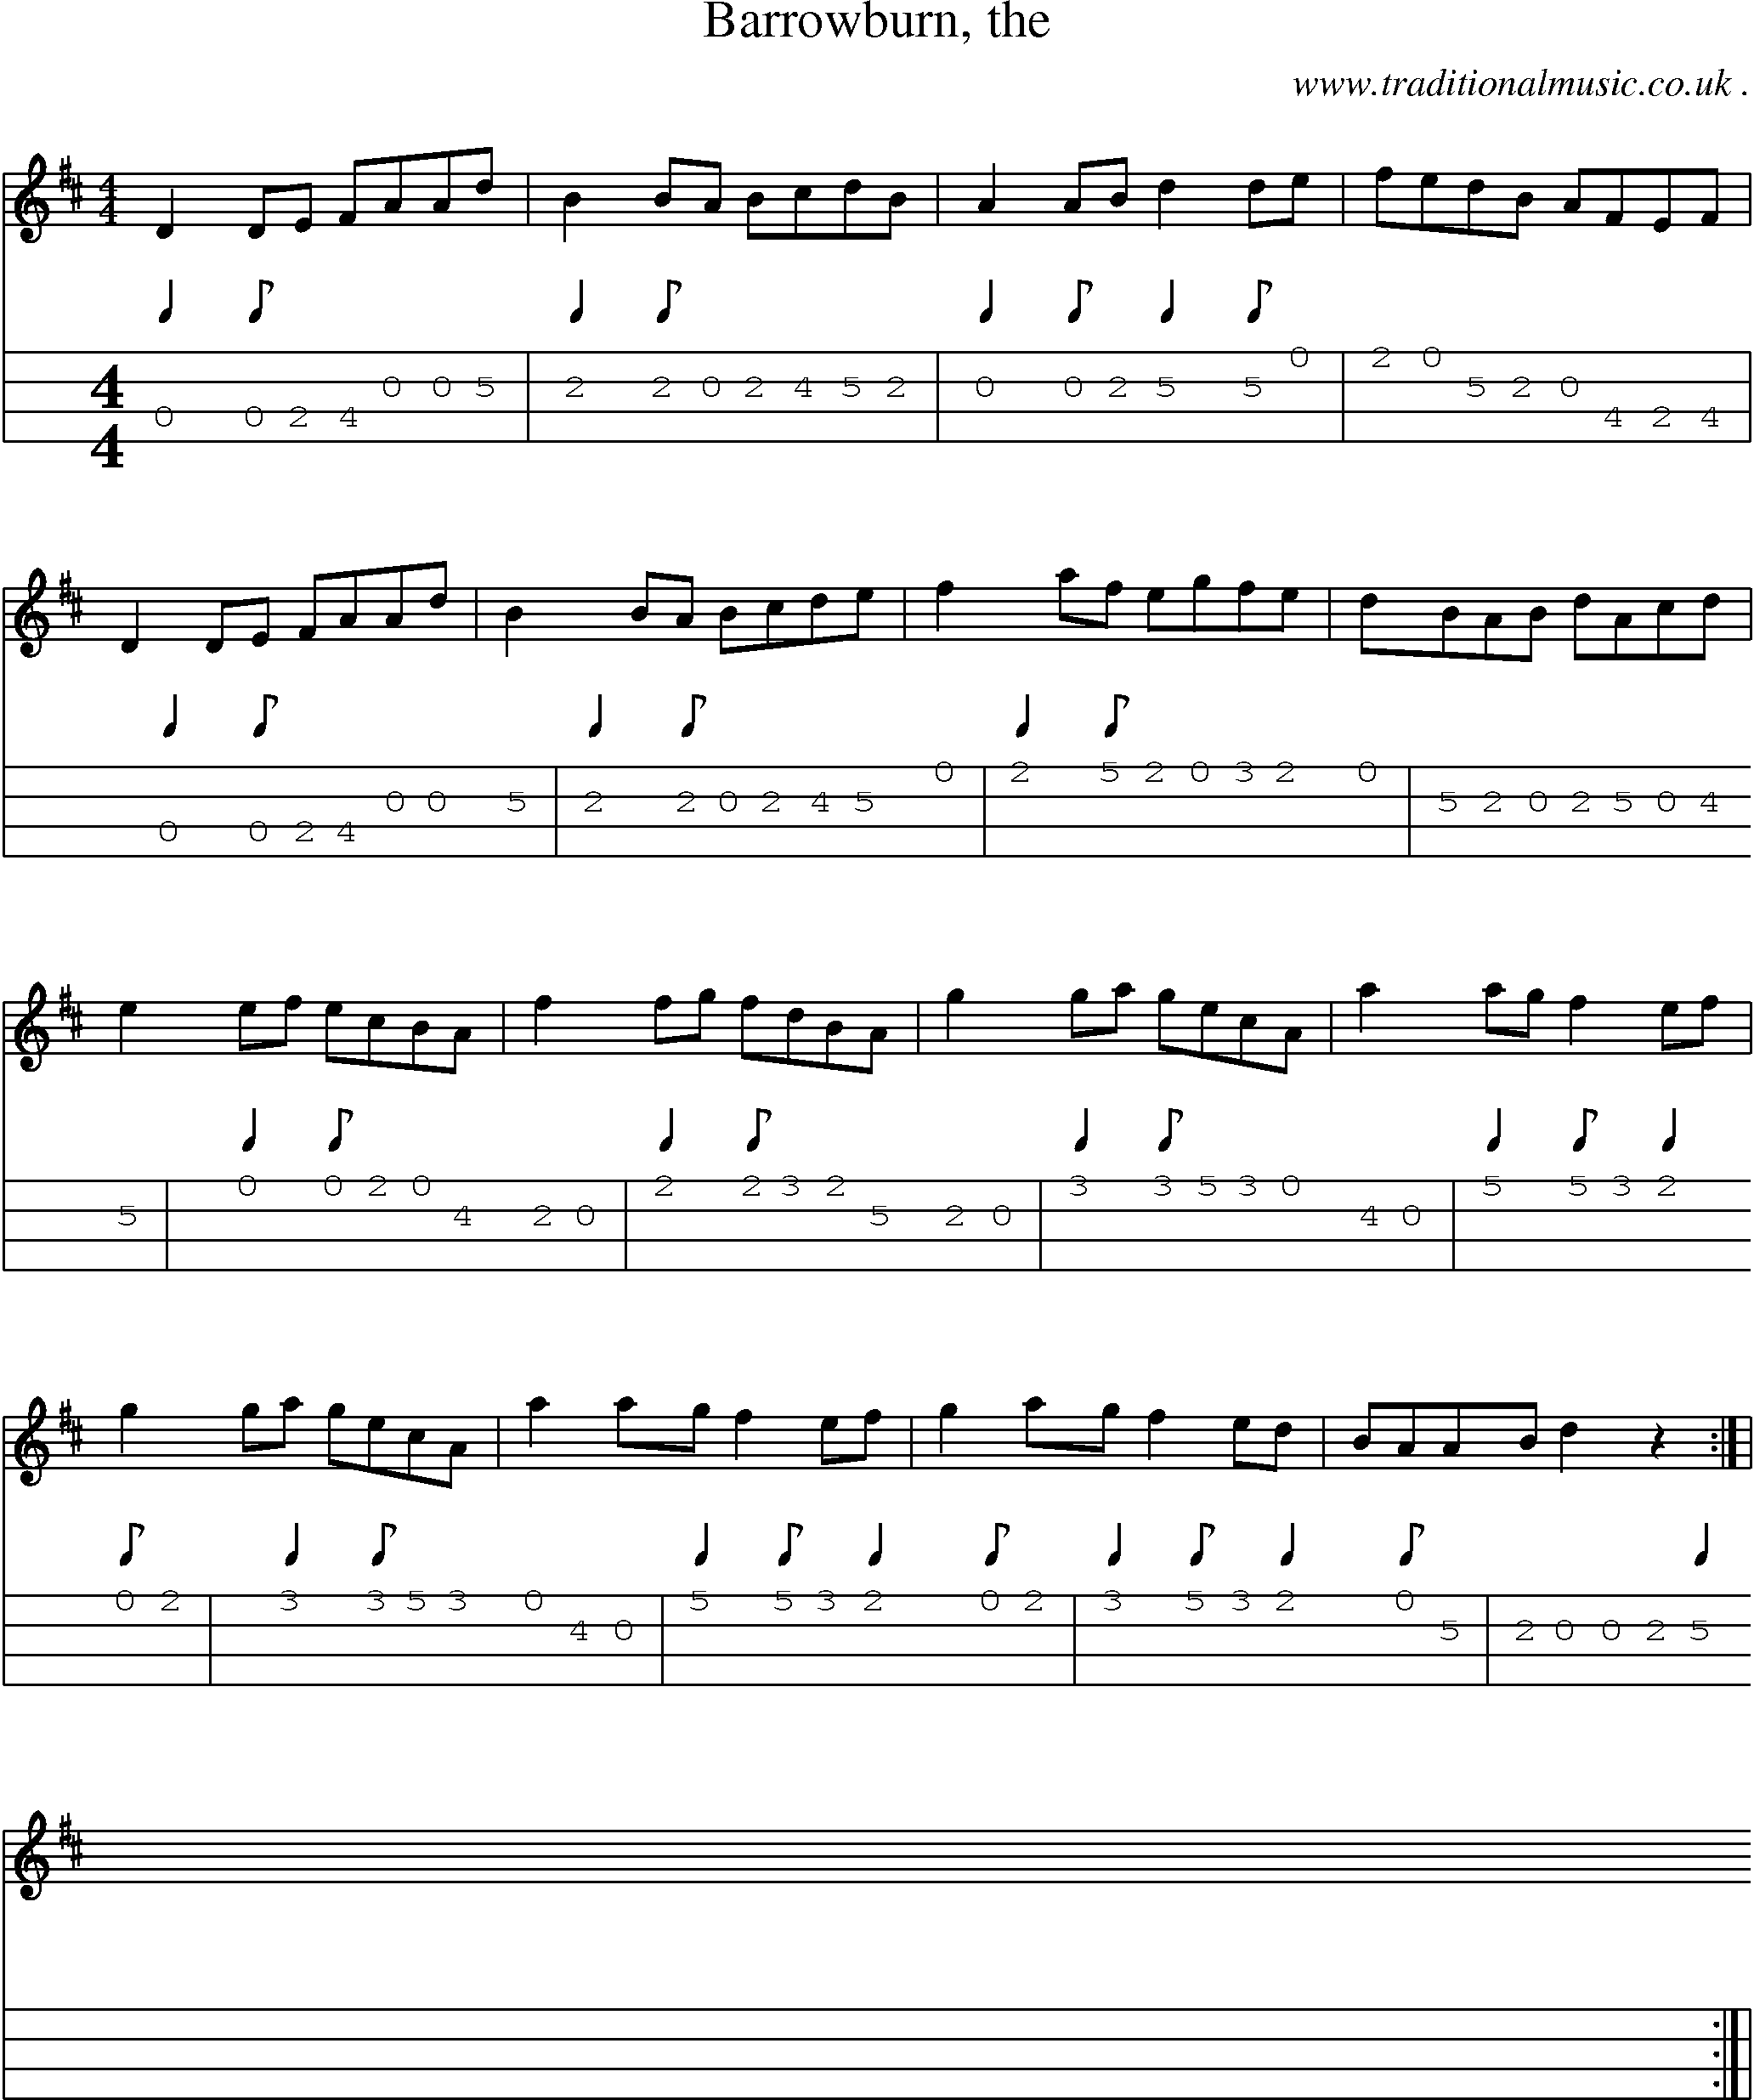 Sheet-music  score, Chords and Mandolin Tabs for Barrowburn The